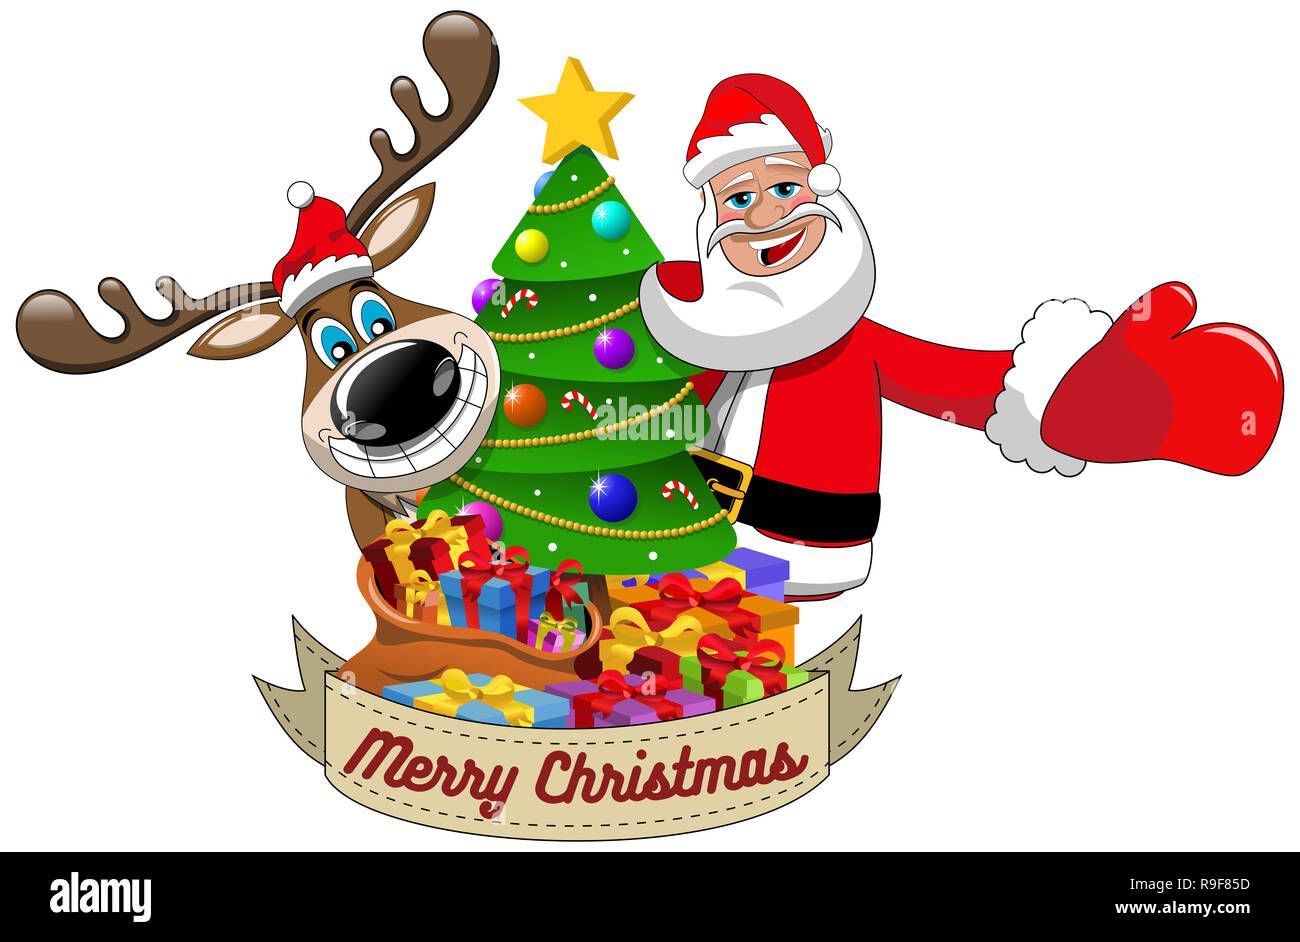 Cartoon funny reindeer and santa claus wishing merry christmas behind  decorated xmas tree isolated Stock Photo - Alamy